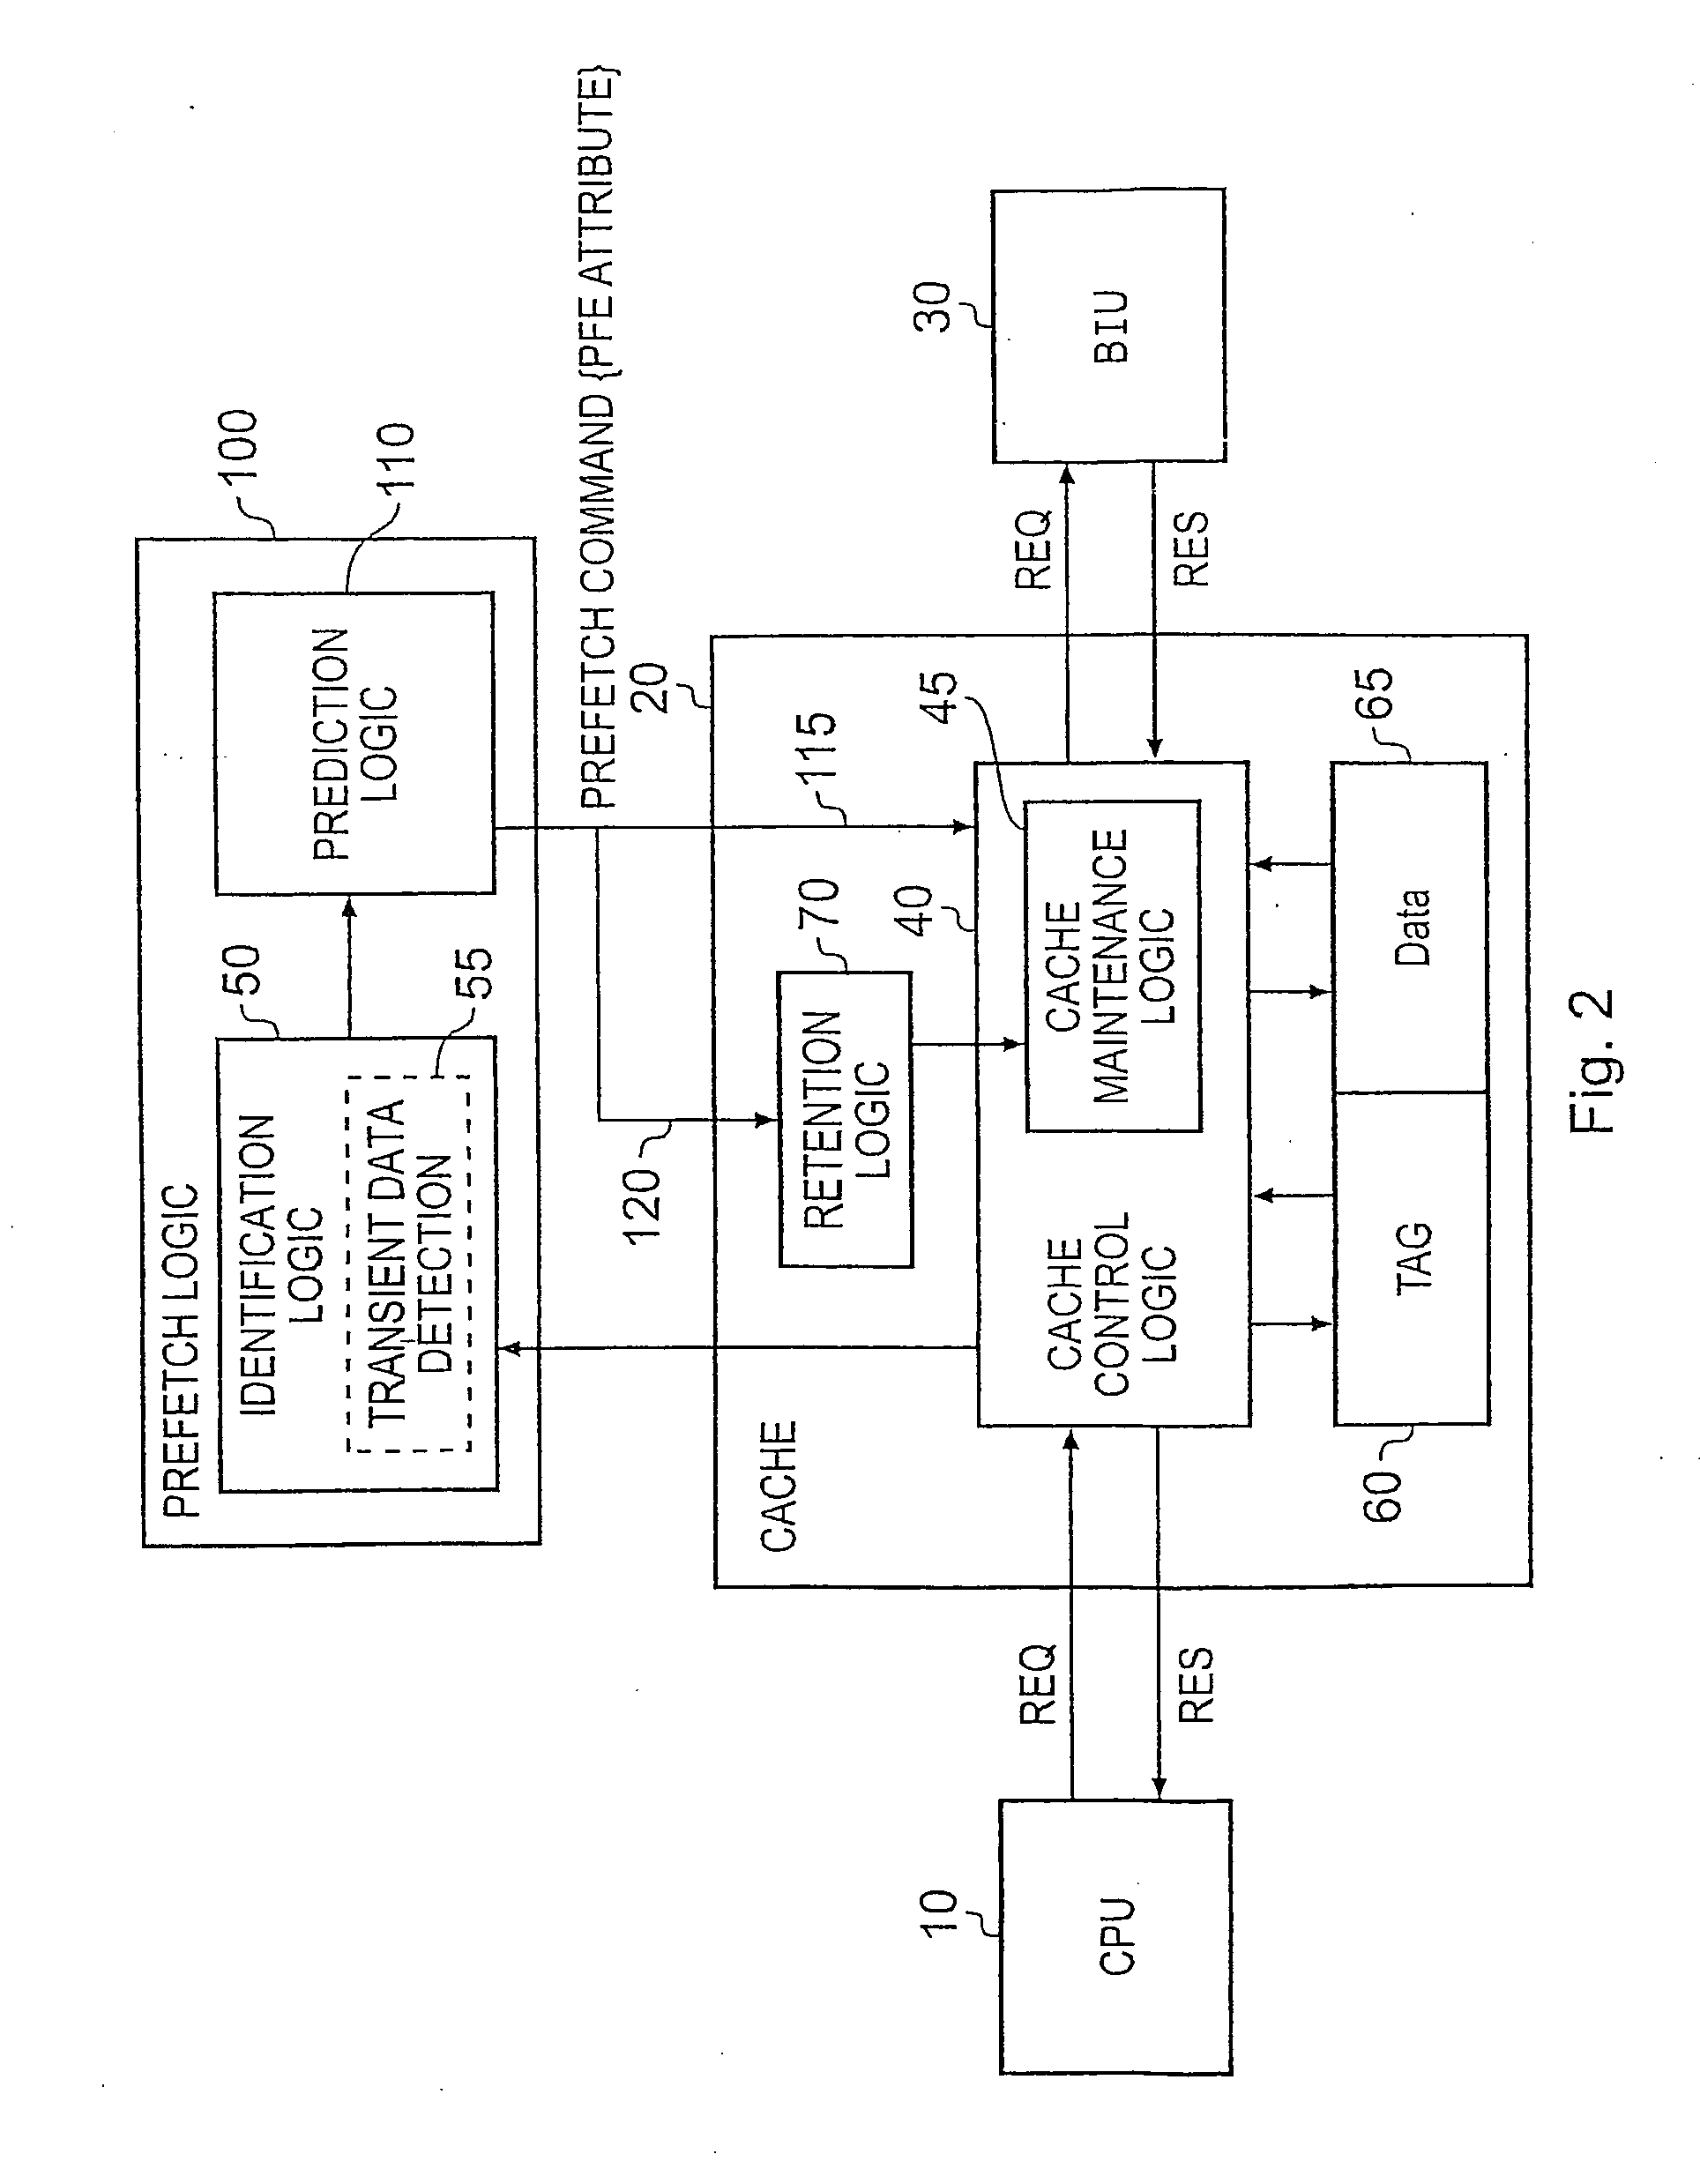 Cache Management Within A Data Processing Apparatus